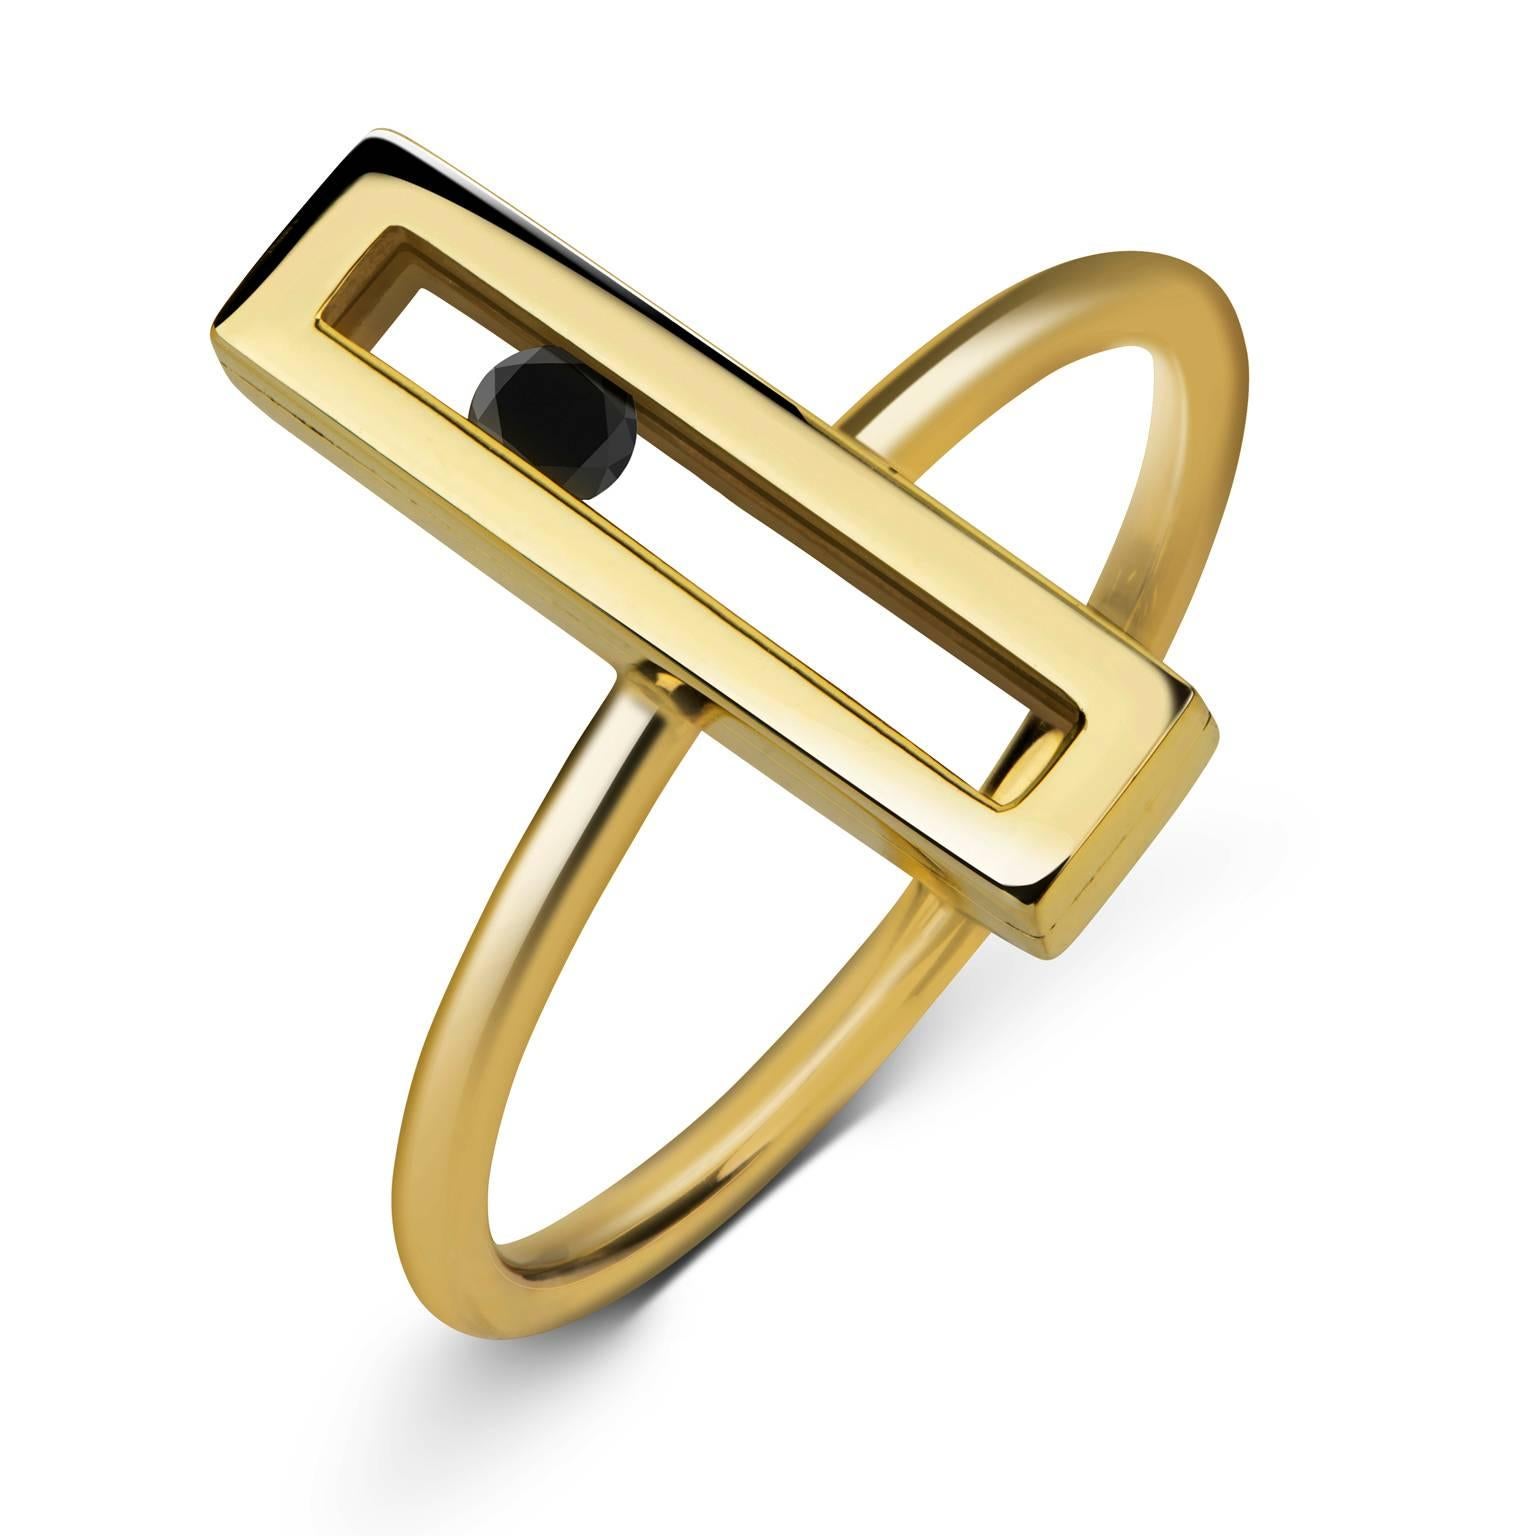 The Slide Collection was inspired by Luke's original award winning SLIDE ring, which won the Lonmin Design Innovation Award in London in 2013. This fine jewellery collection features beautifully simple forms in solid 9ct gold and a signature sliding